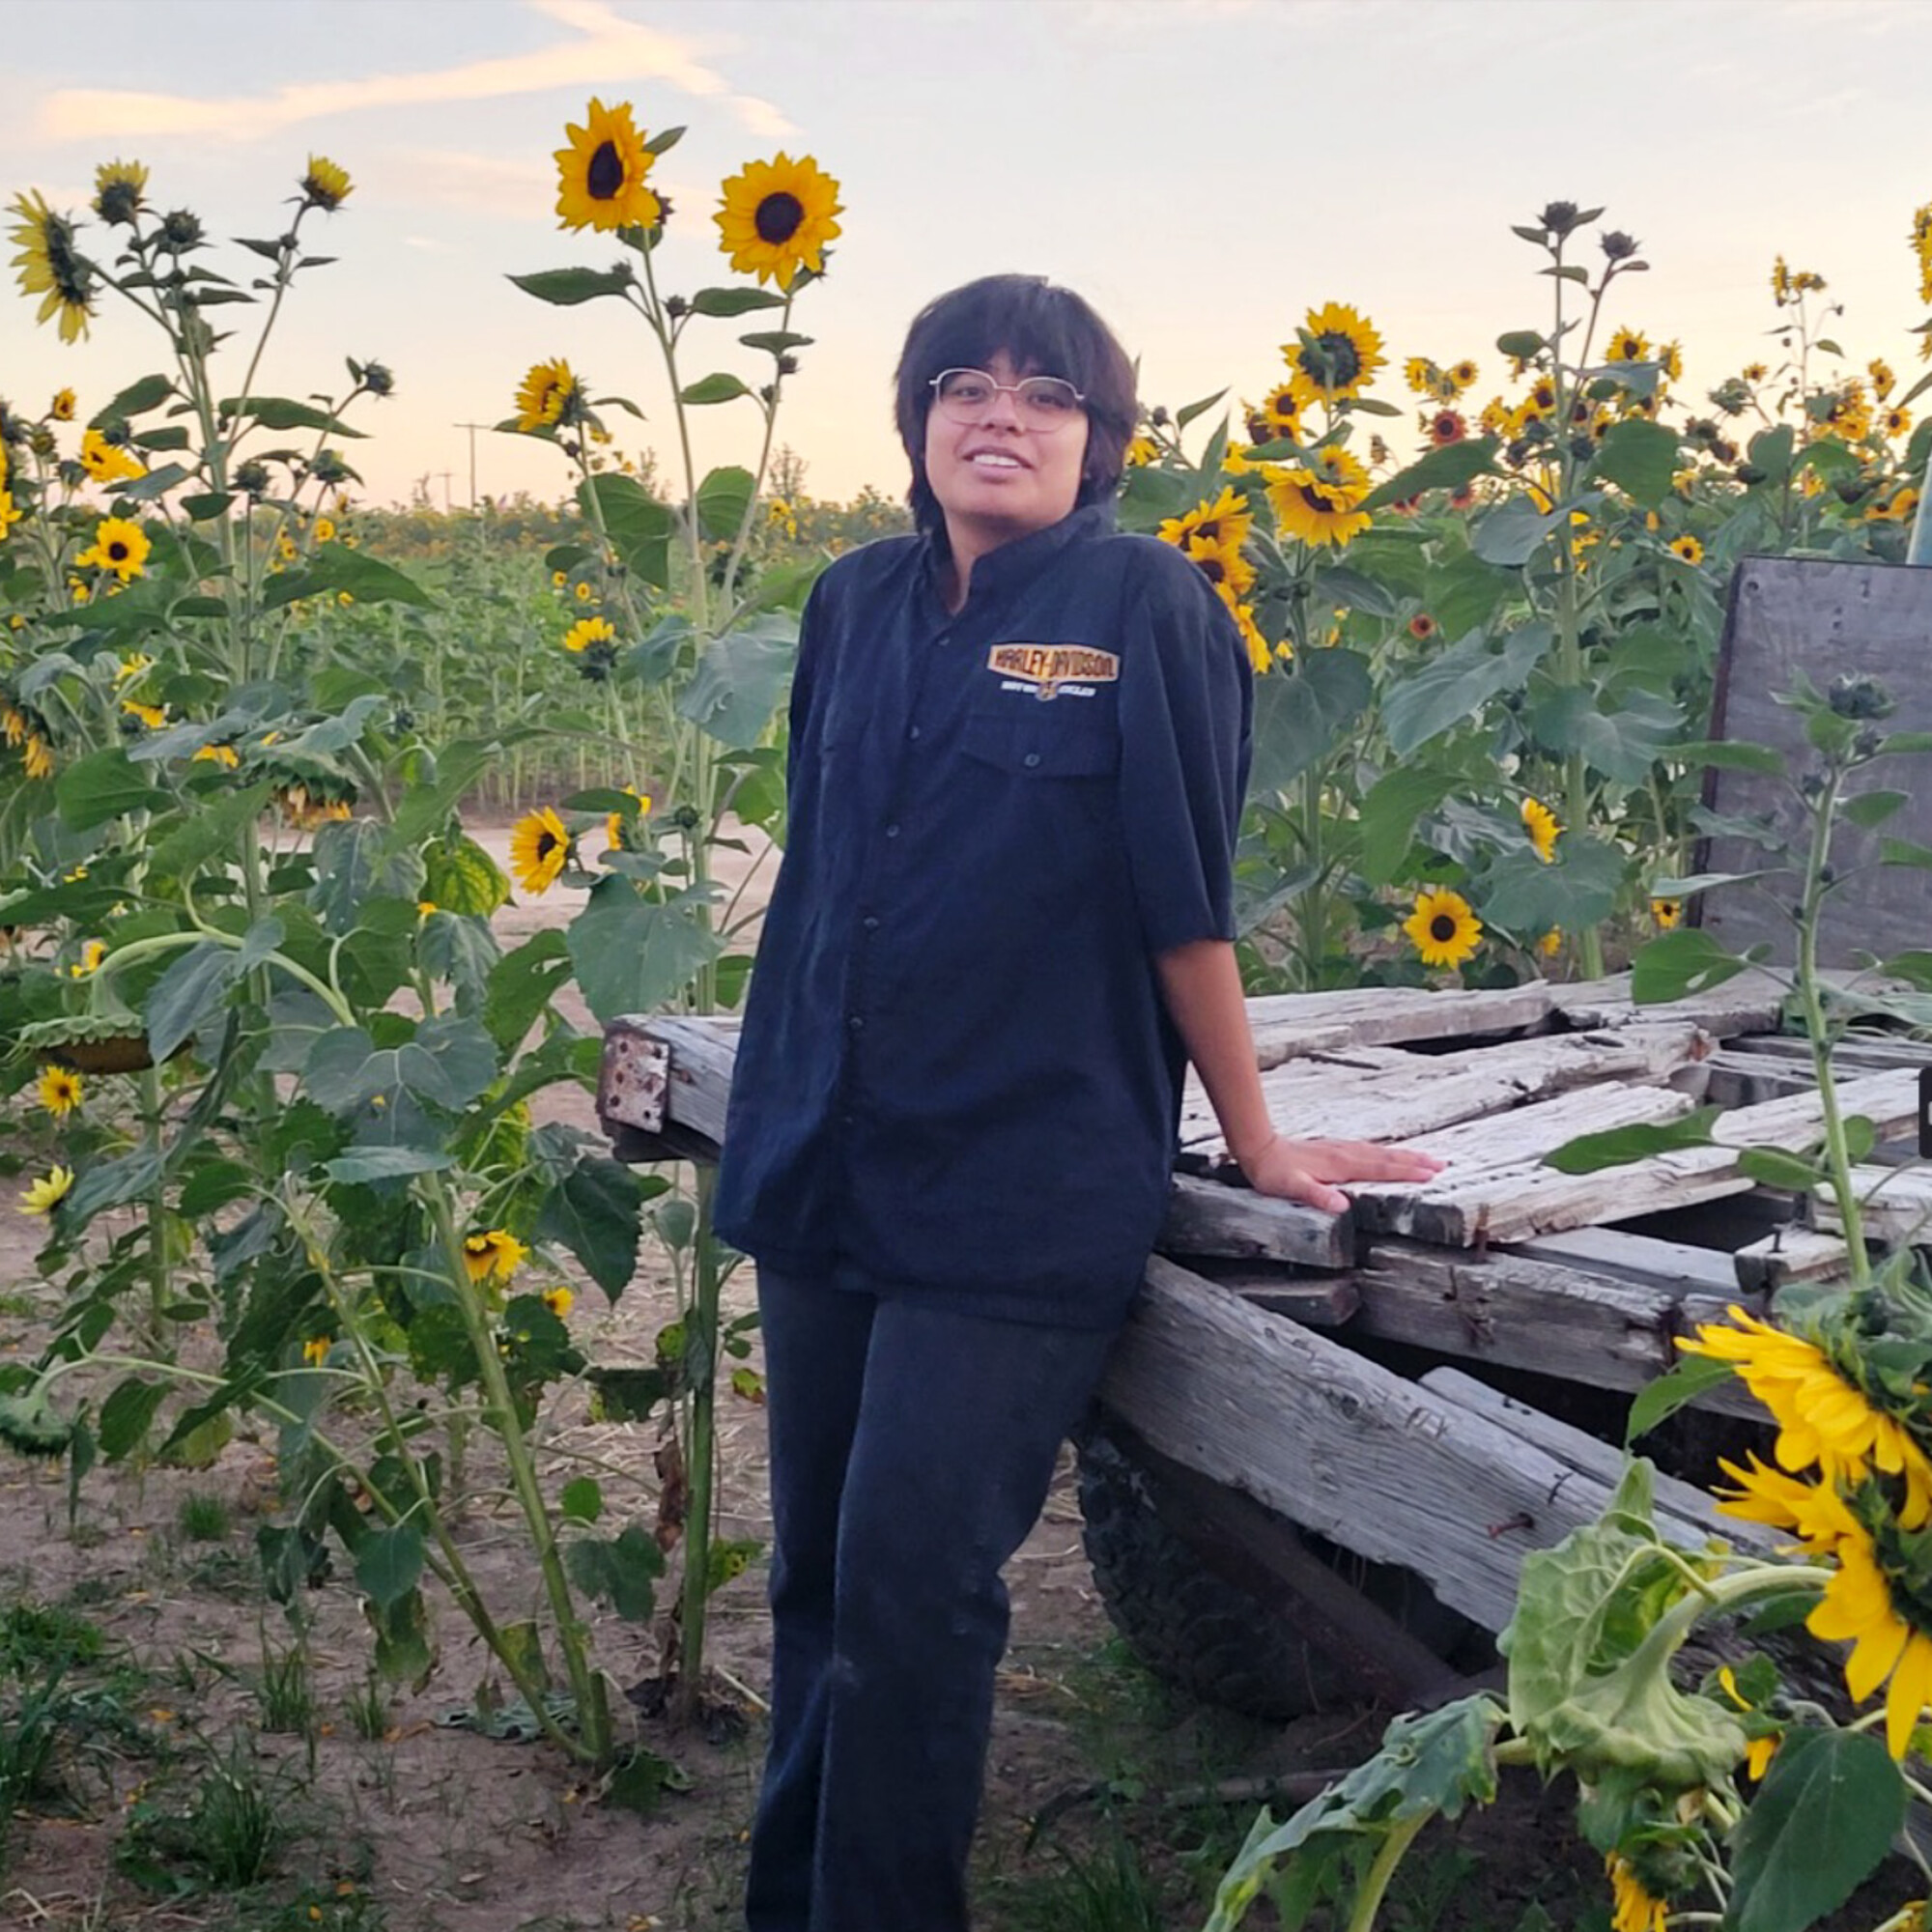 A student stands by an old wagon in a field of sunflowers.